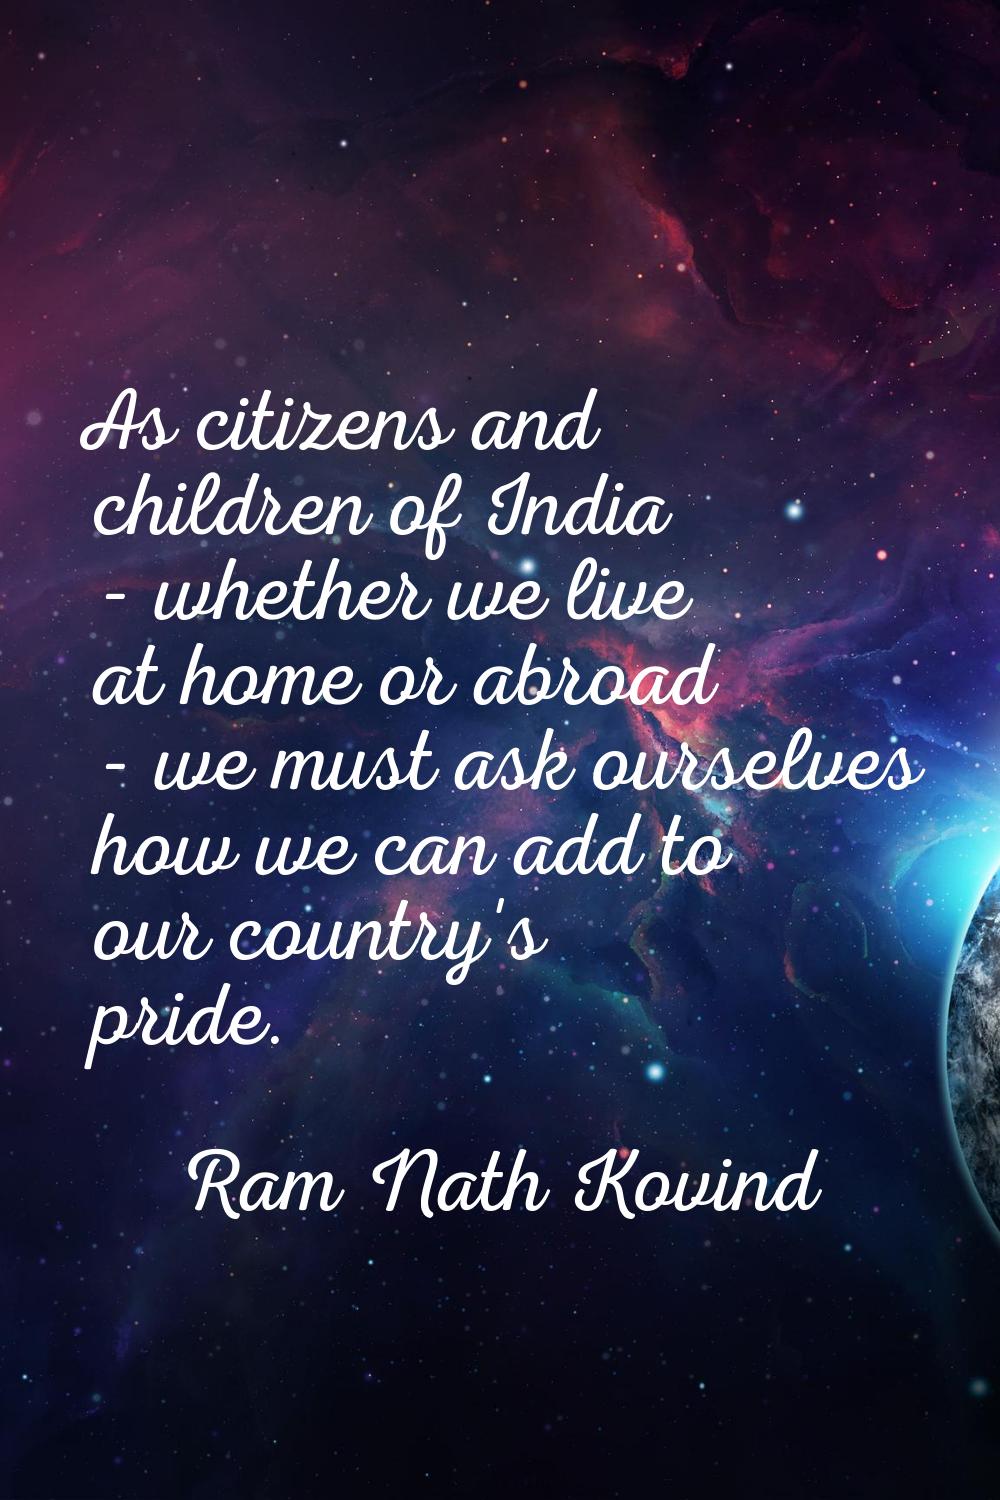 As citizens and children of India - whether we live at home or abroad - we must ask ourselves how w